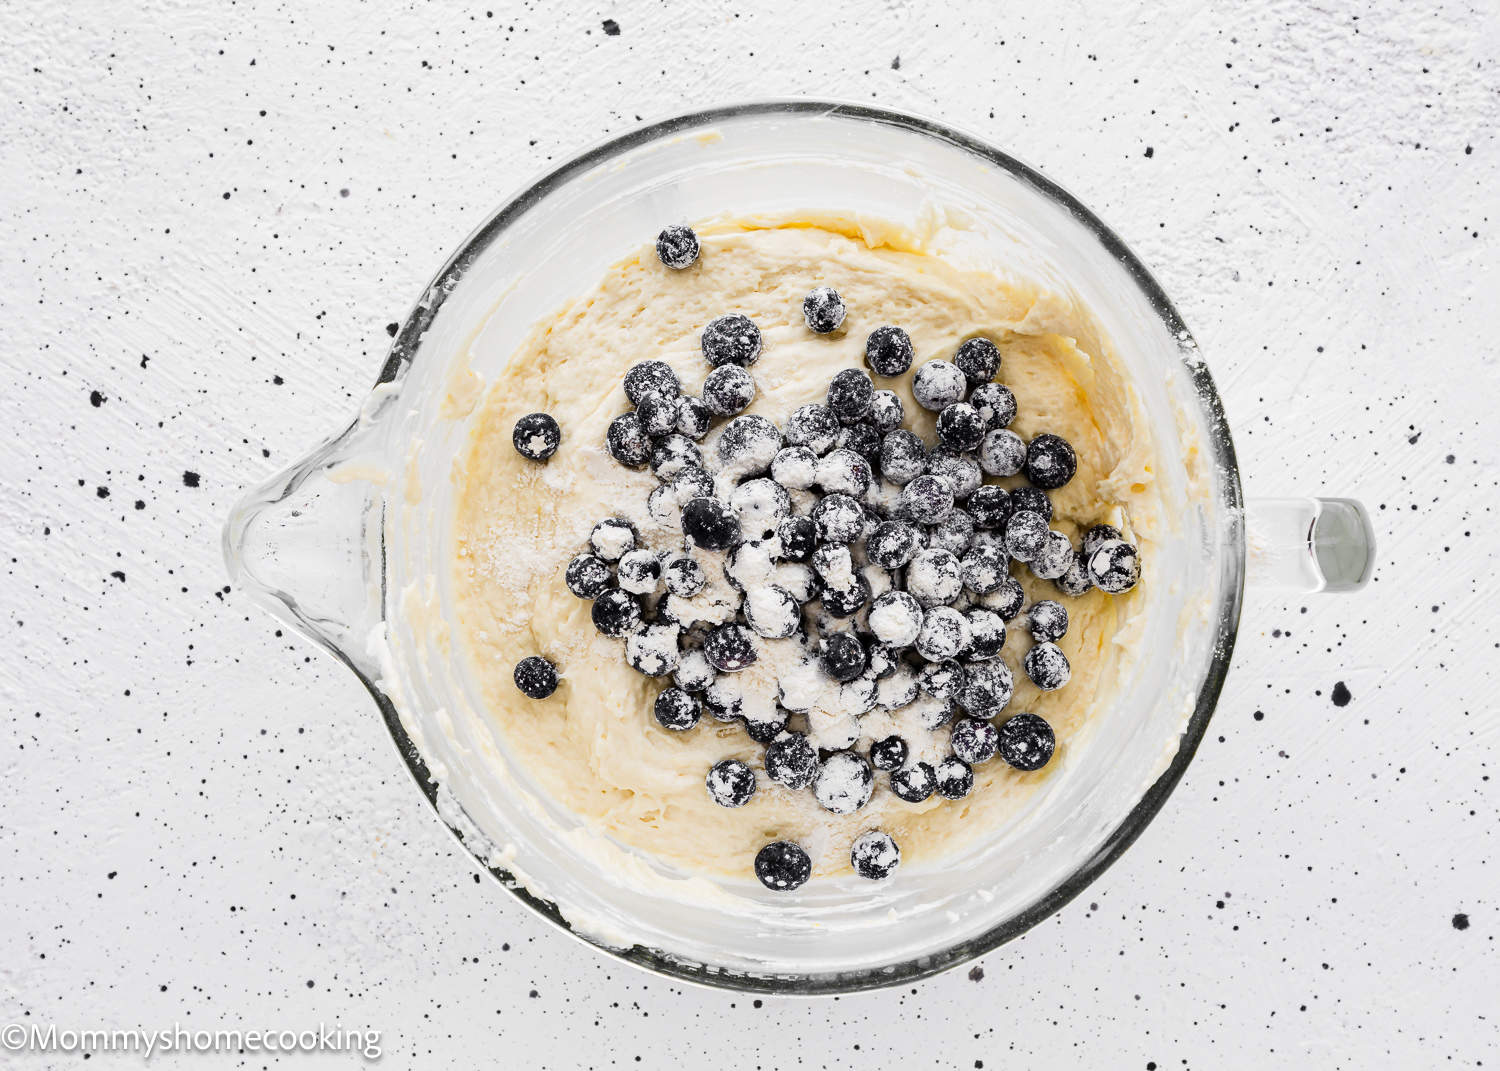 Eggless Lemon blueberry Loaf Cake batter in stand mixer bowl with more blueberries on top.